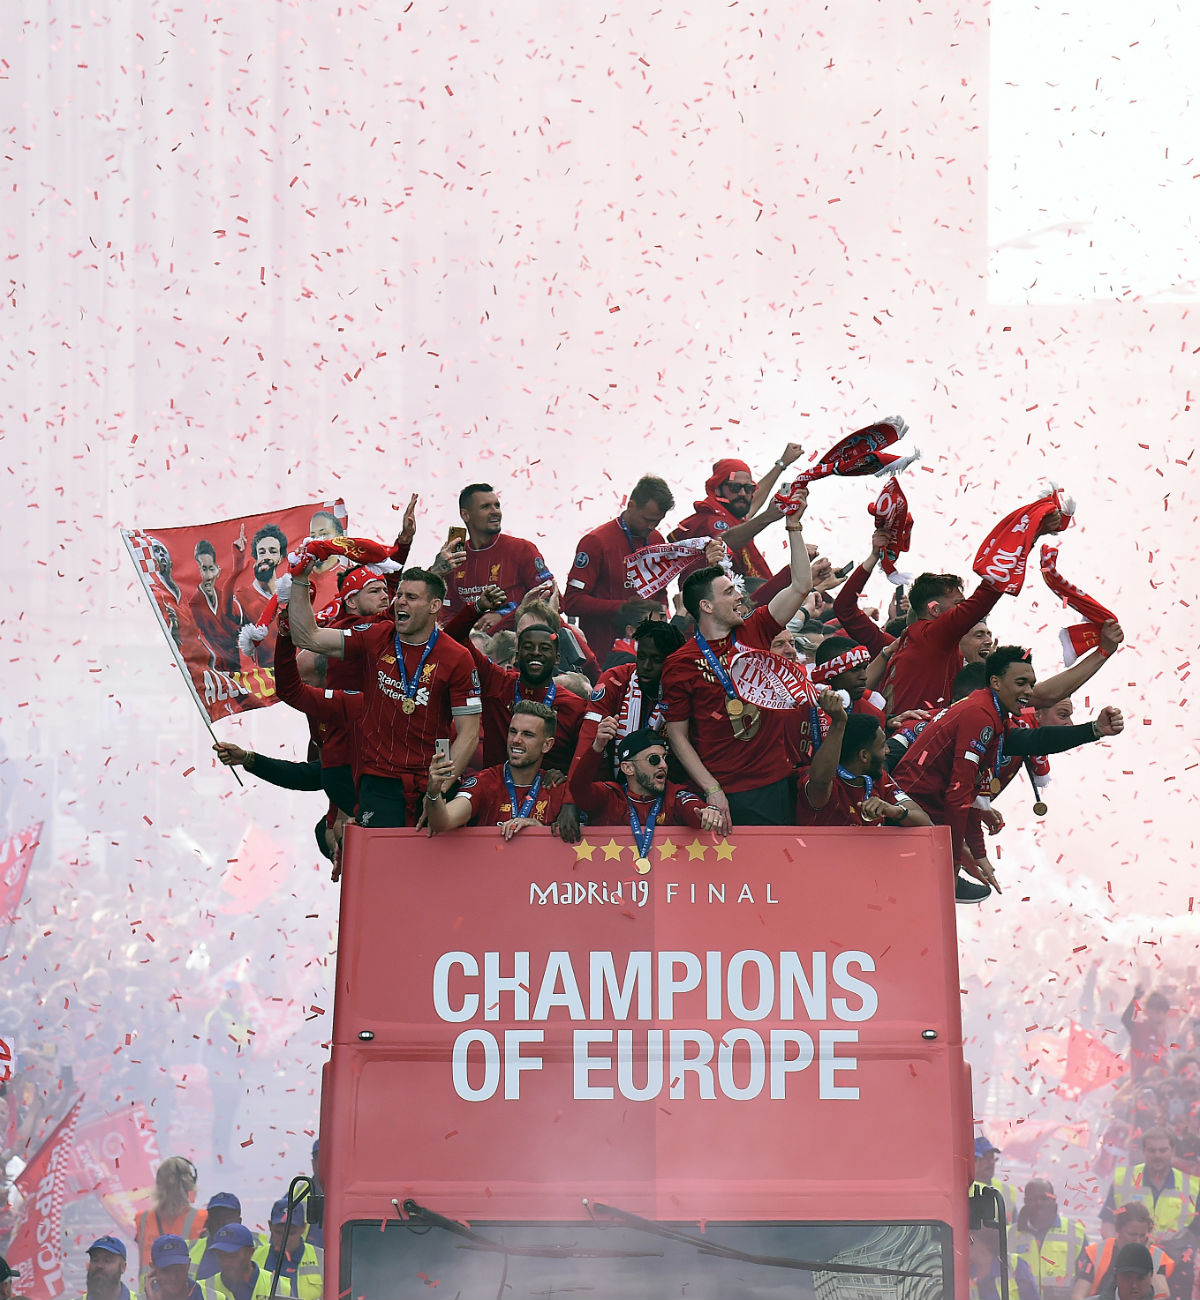 One year on: Highlights and photo from Liverpool's CL trophy parade